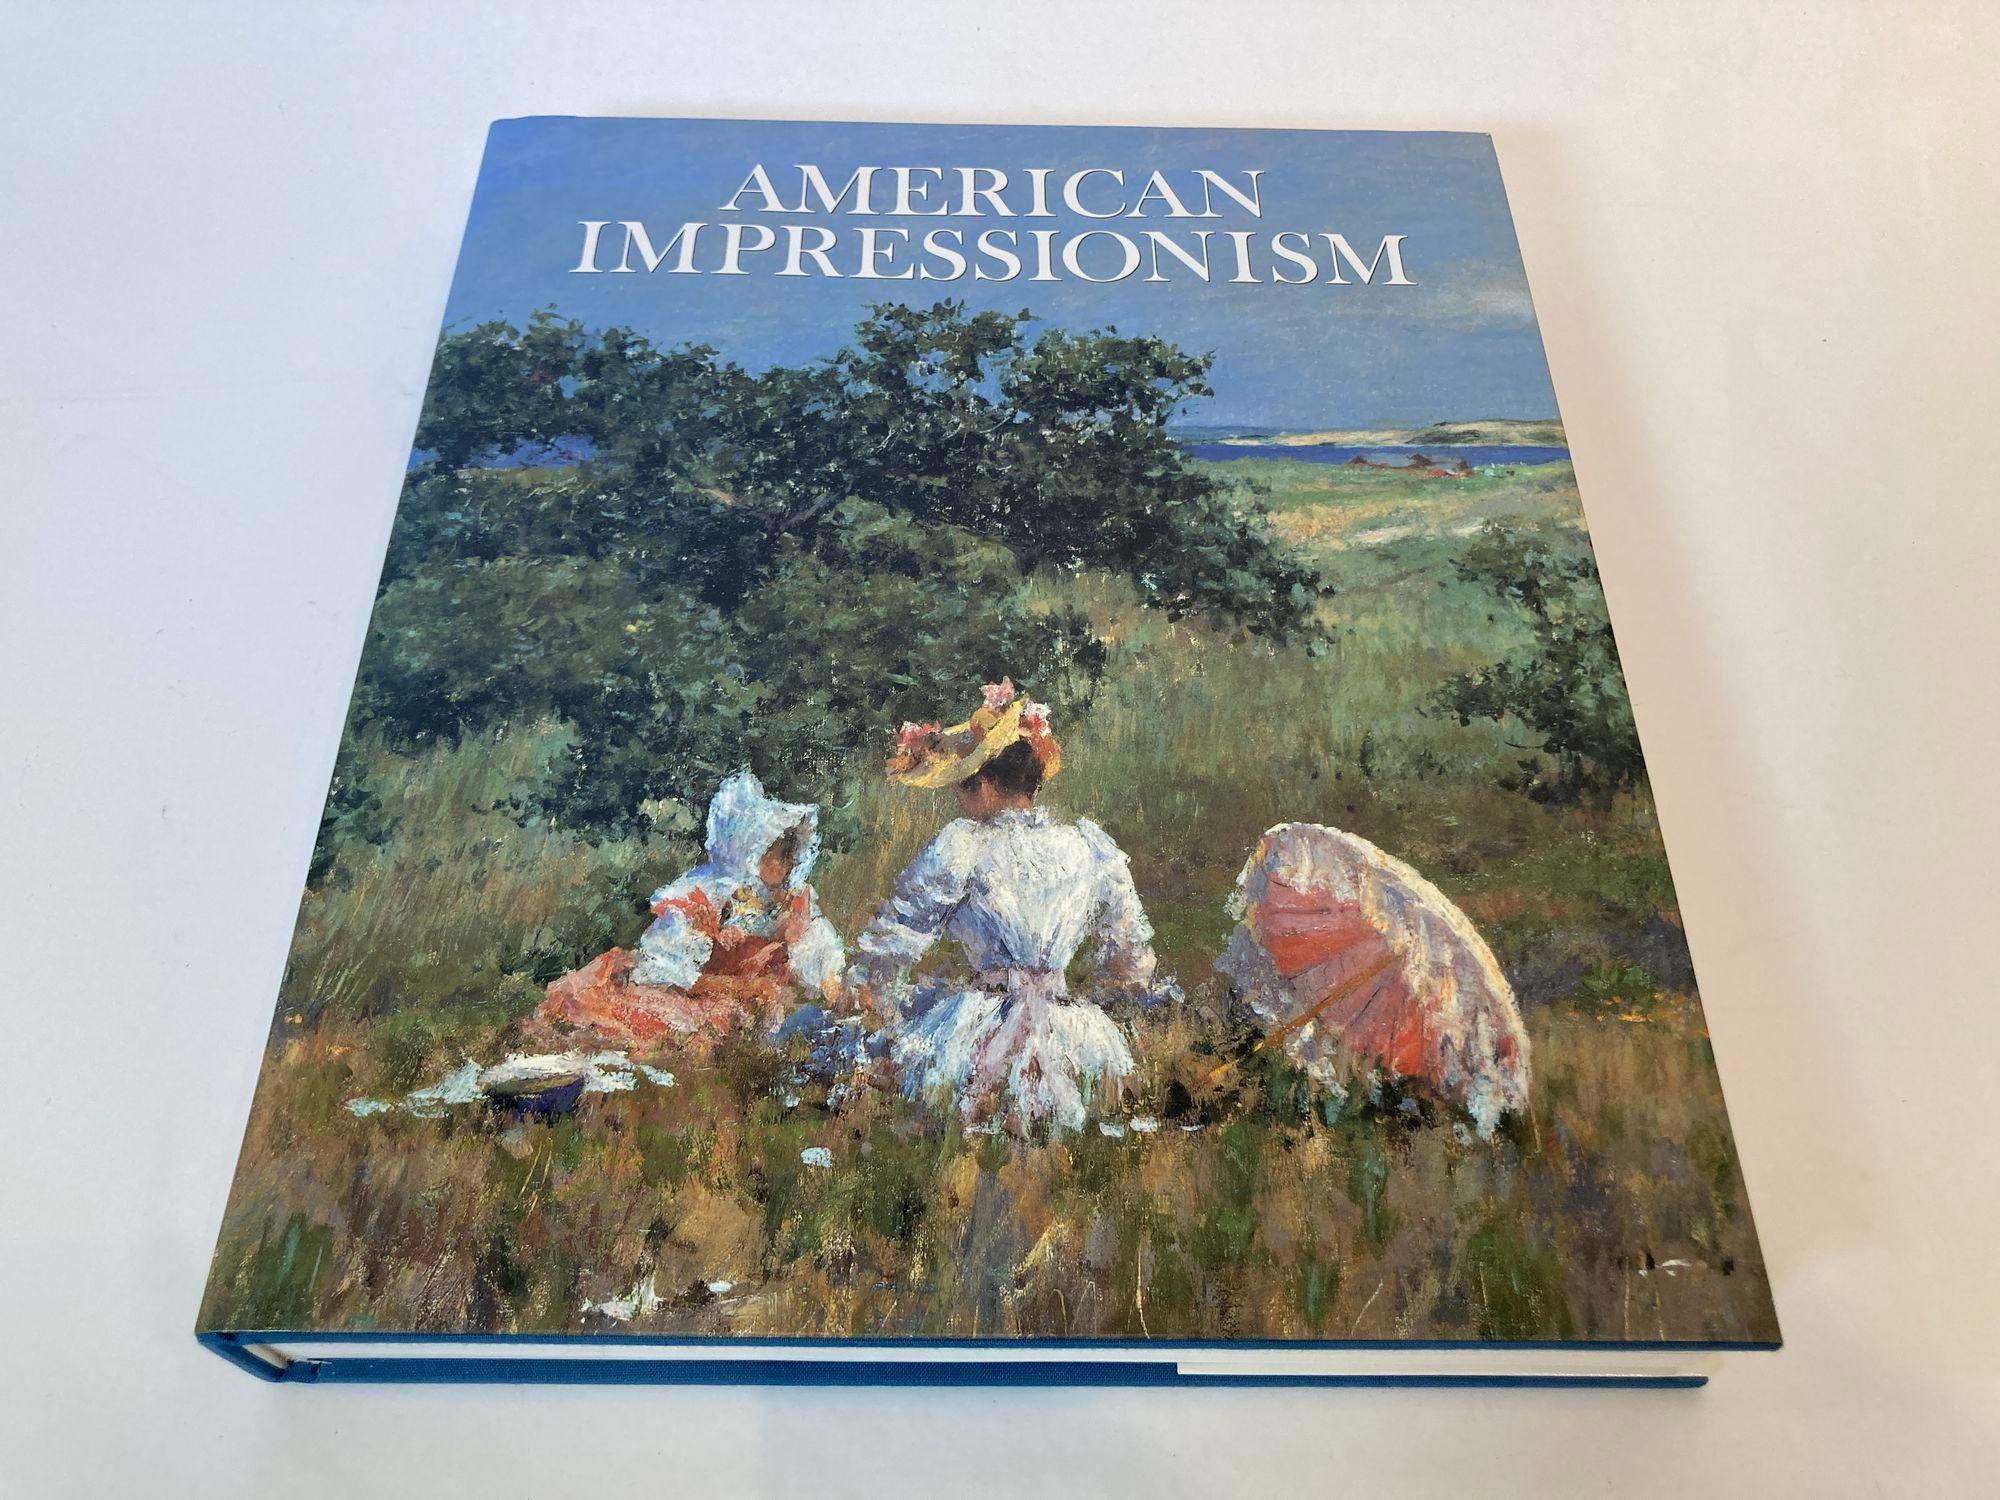 American Impressionism Hardcover Book by William H. Gerdts.
American Impressionism Book by William H. Gerdts Hardcover Book.
Lavishly illustrated with more than 400 paintings by 125 different artists, this volume contains documentary photographs